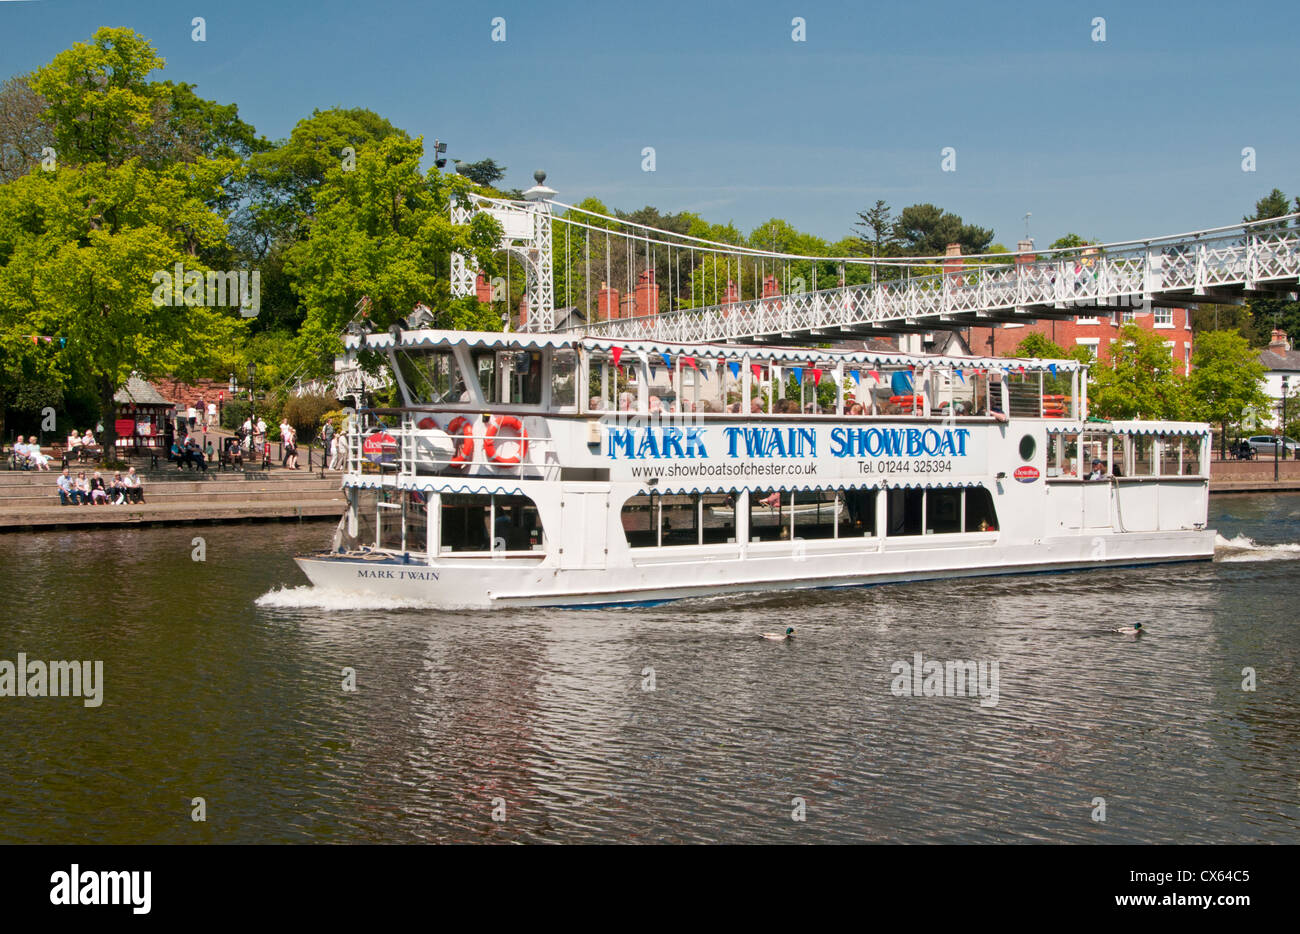 Mark Twain Tourboat on River Dee Beneath Queens Park Bridge, The Groves, Chester, Cheshire, England, UK Stock Photo